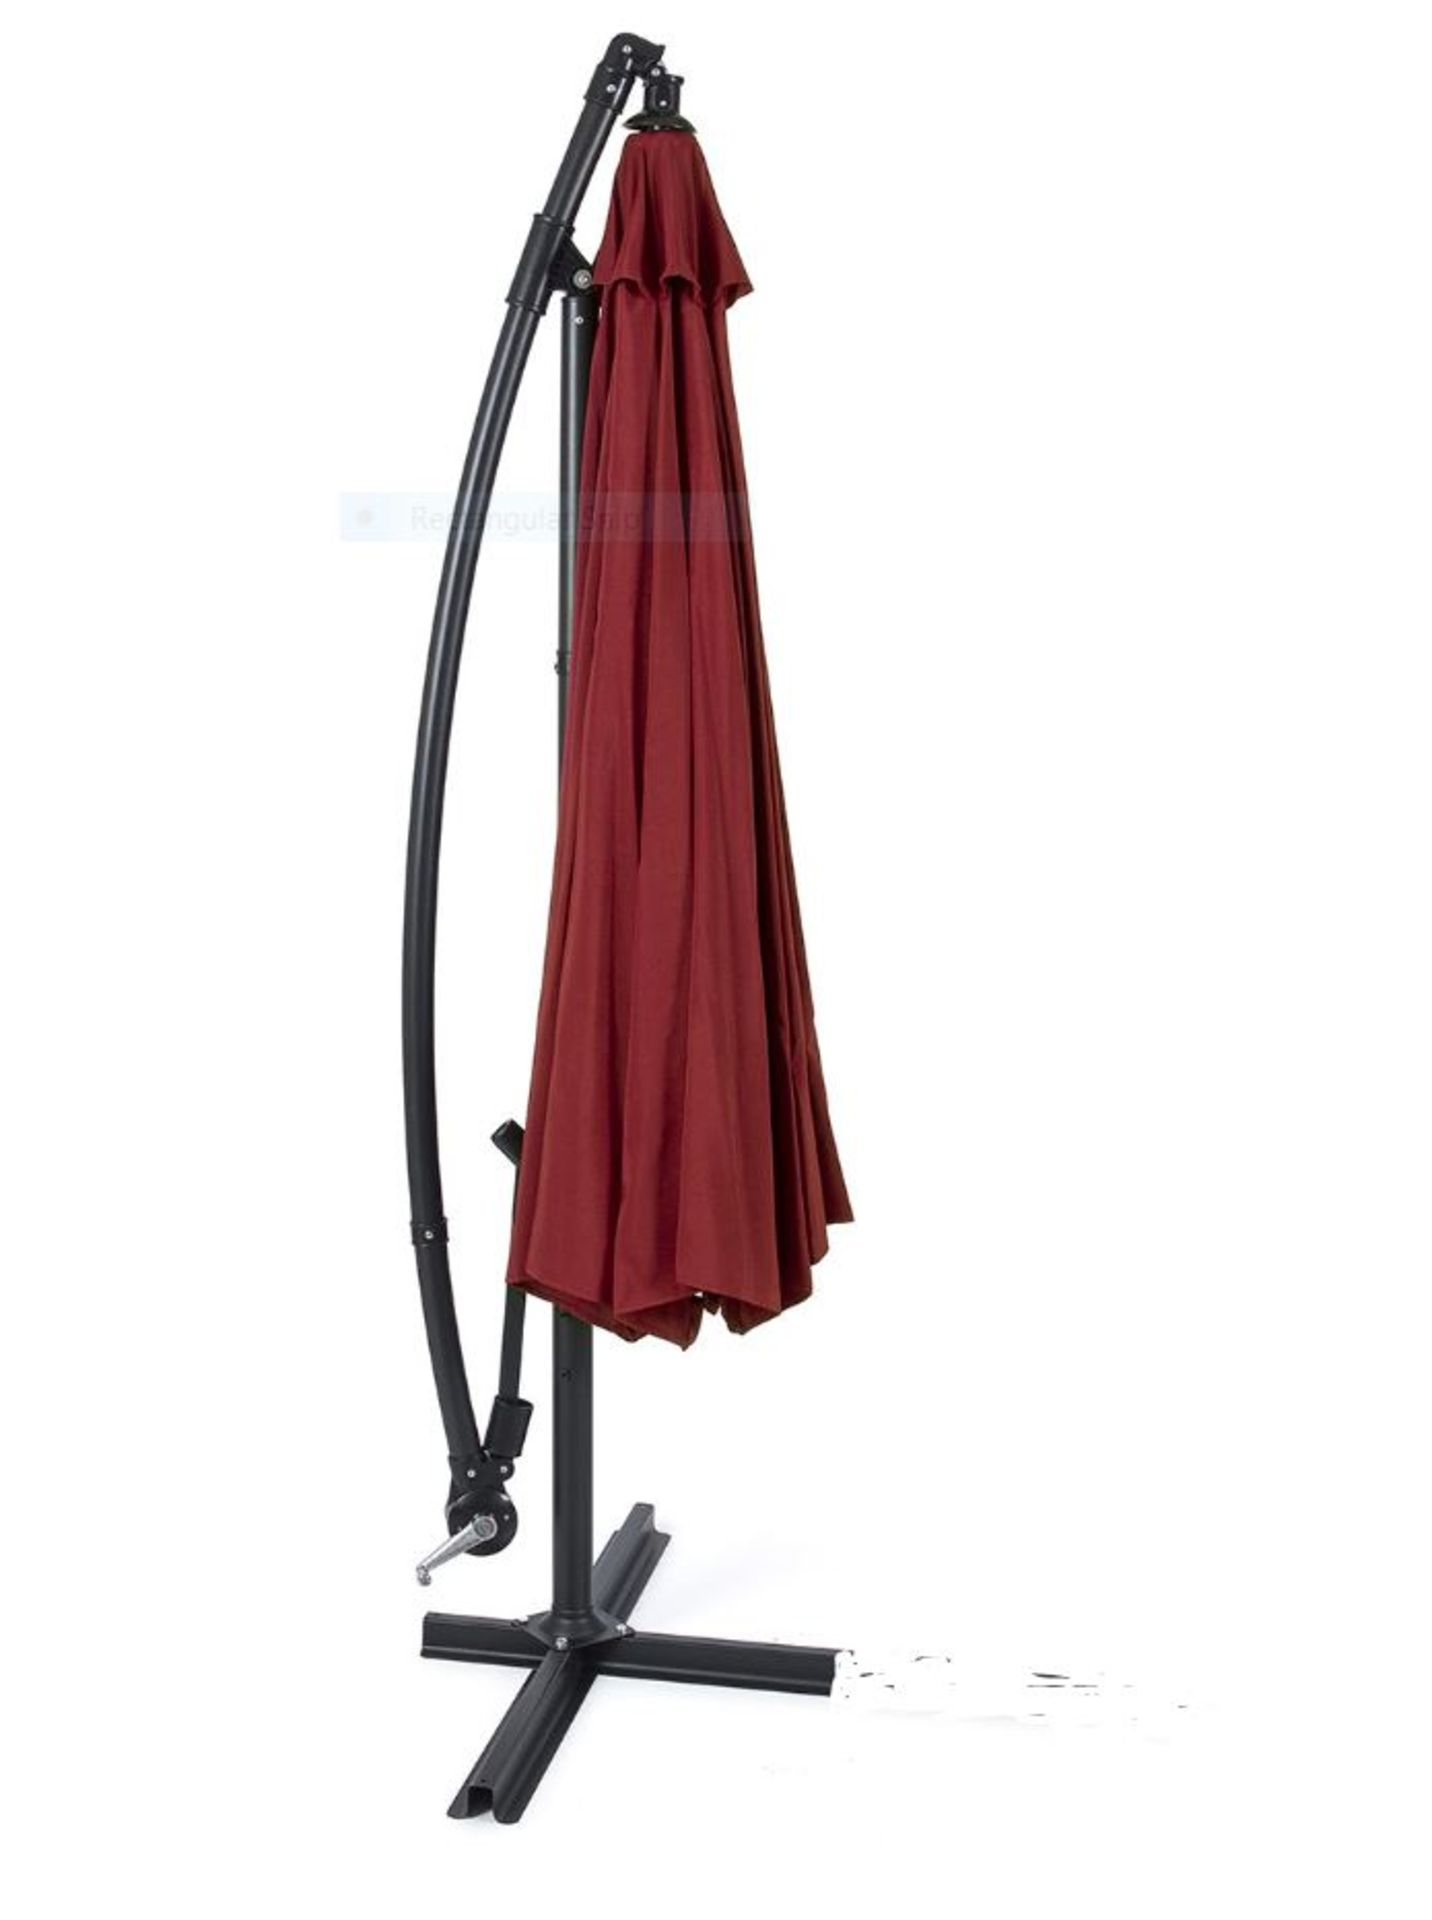 Burgundy Banana Parasol 3m Wide Brand New boxed. Manufactured with a strong steel frame complete